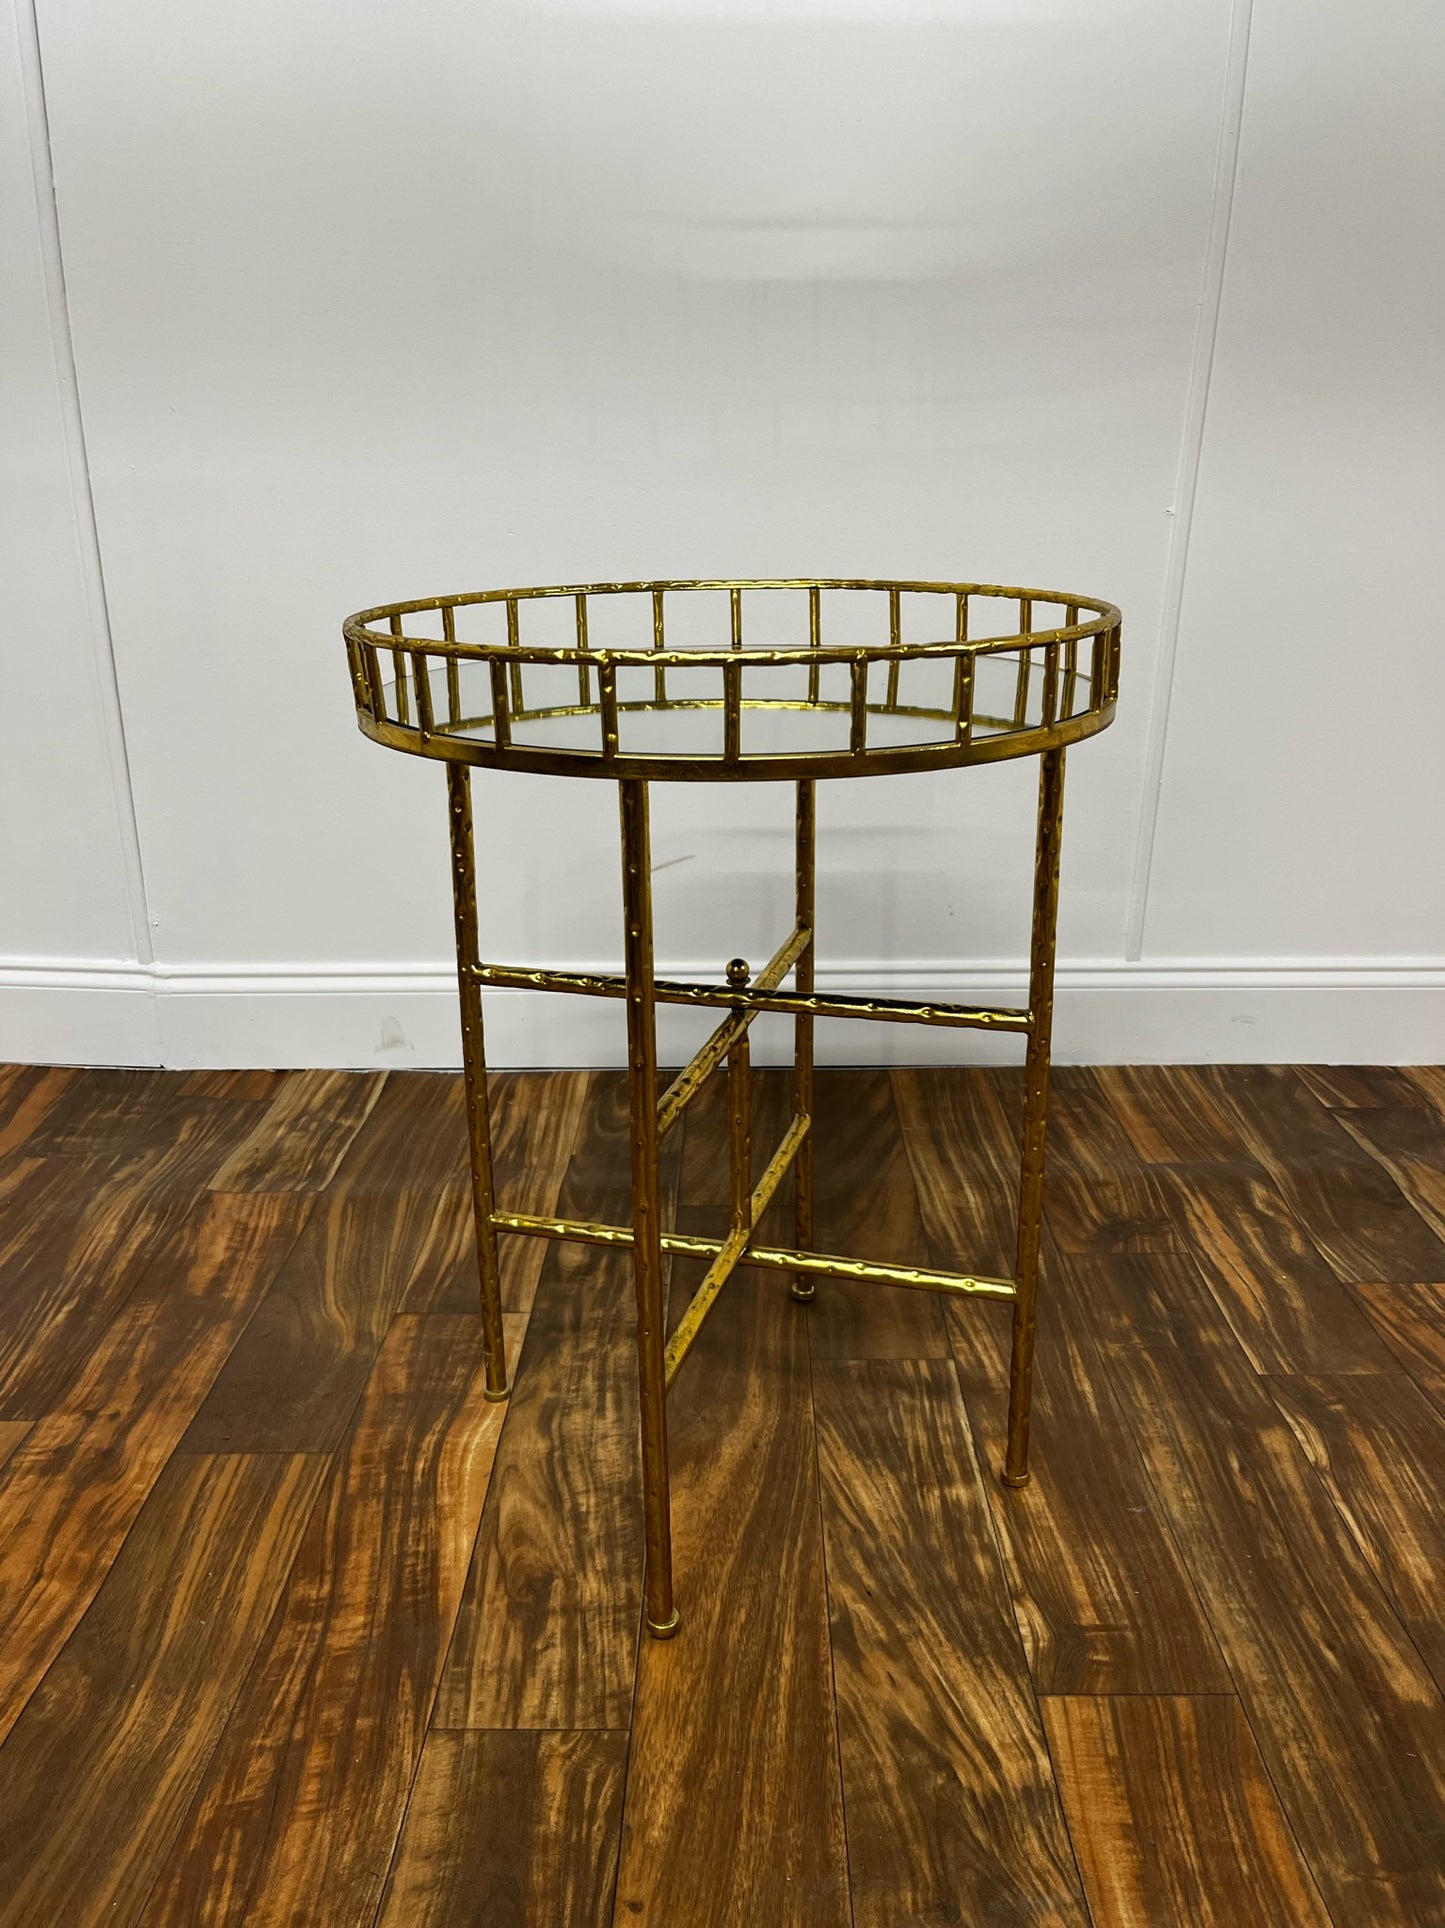 ROUND MIRROR ACCENT TABLE WITH GOLD BAMBOO LEGS